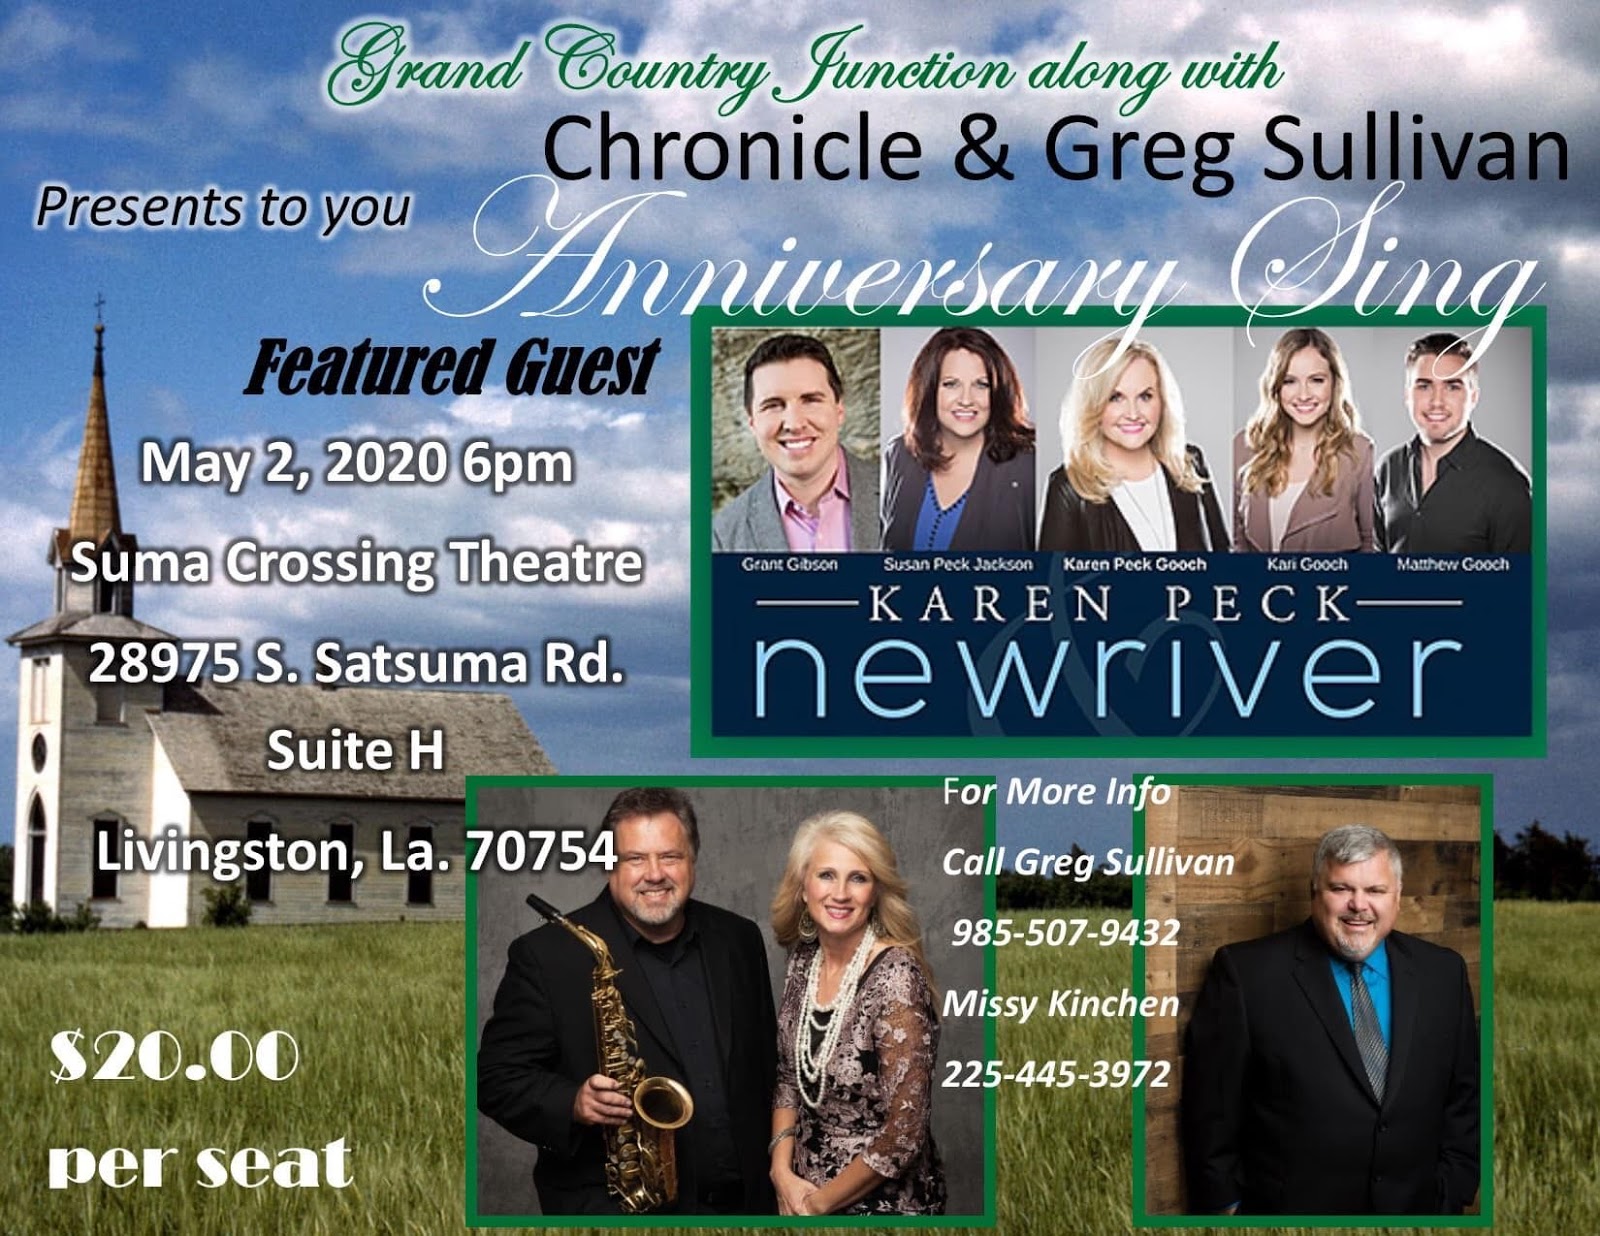 Chronicle Announces 11th Annual Anniversary Sing Featuring Karen Peck and New River